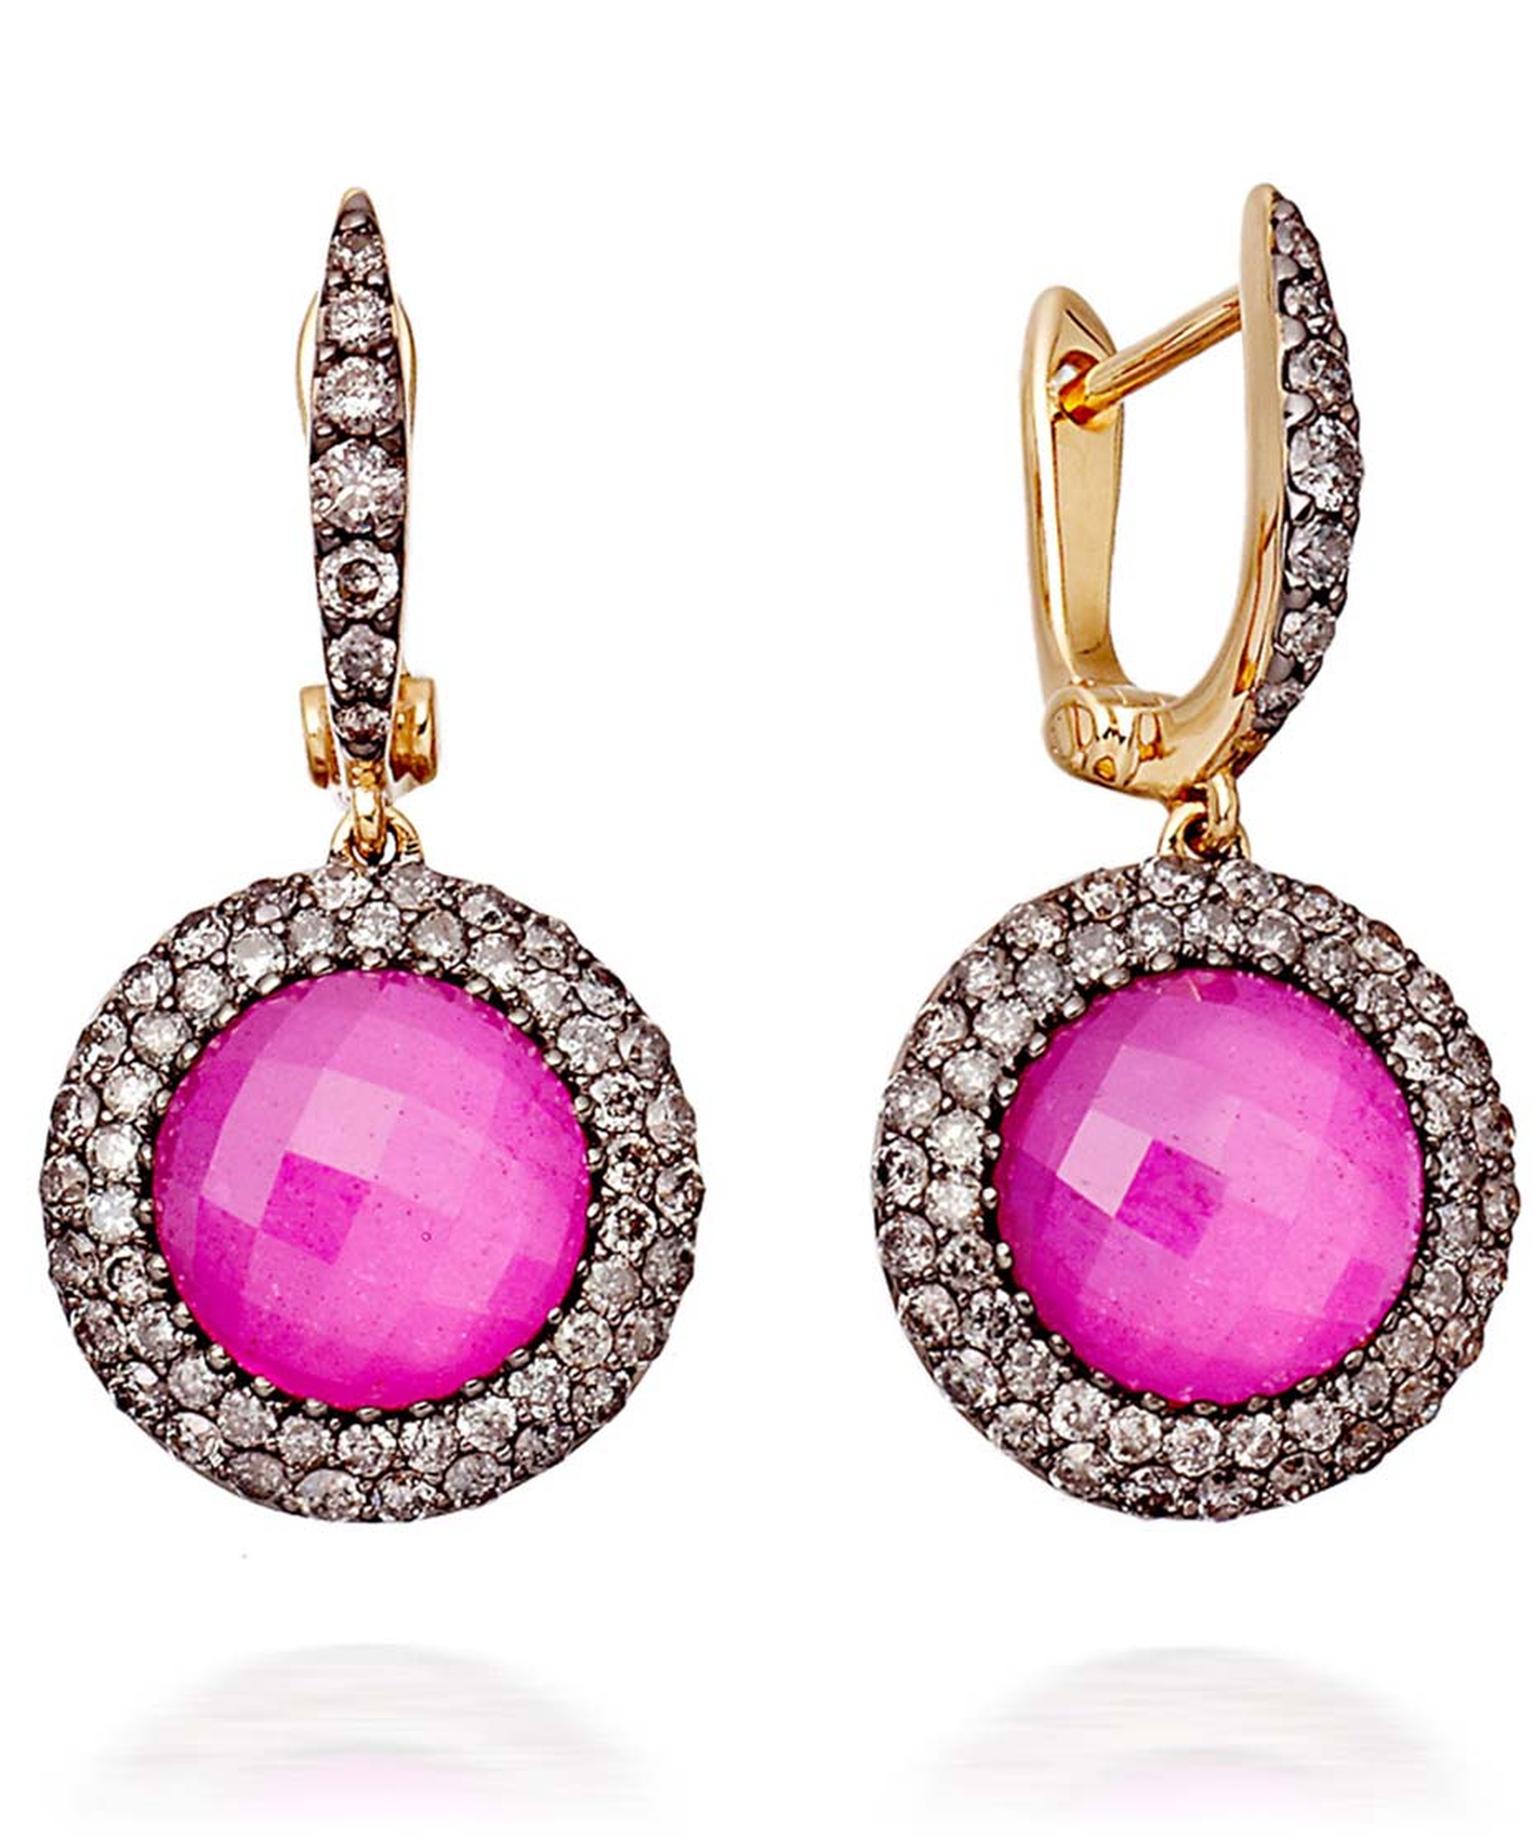 Astley Clarke Mini Connie earrings with rubies surrounded by pavé diamonds (£3,950).